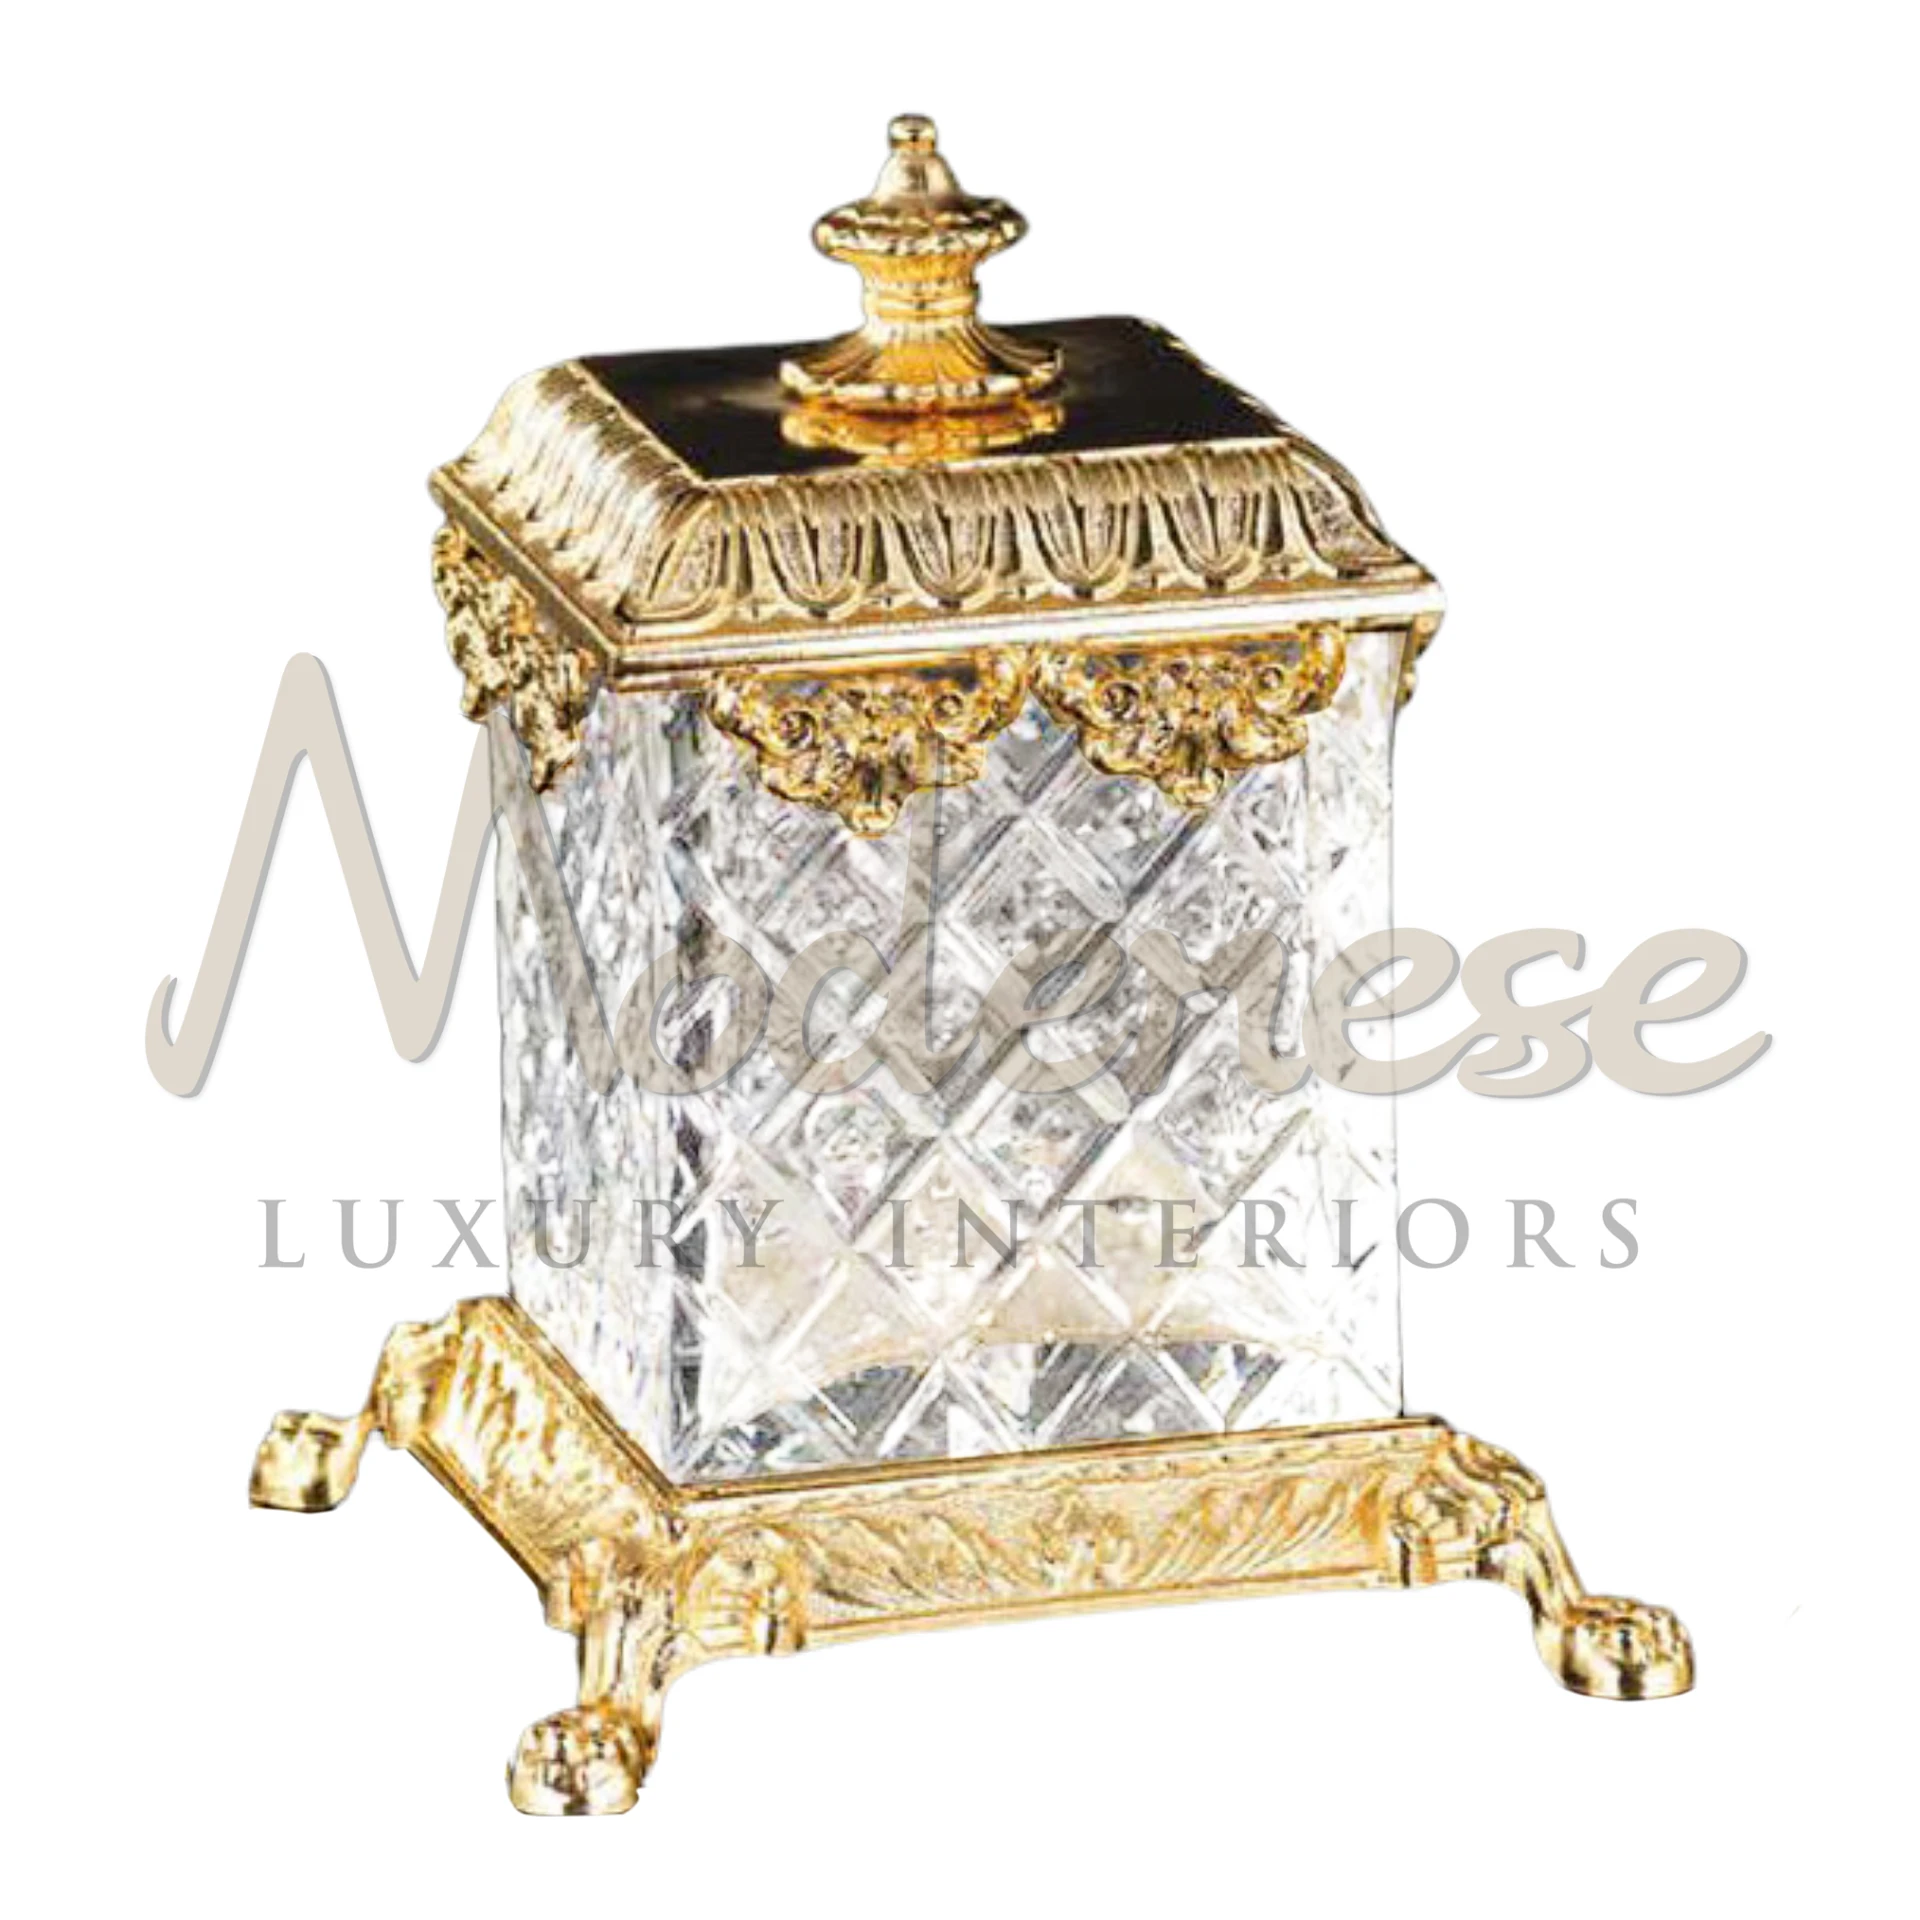 Exquisite Glass Box, ideal for displaying jewelry or ornamental objects, enhancing any space with its glamour and elegant design.